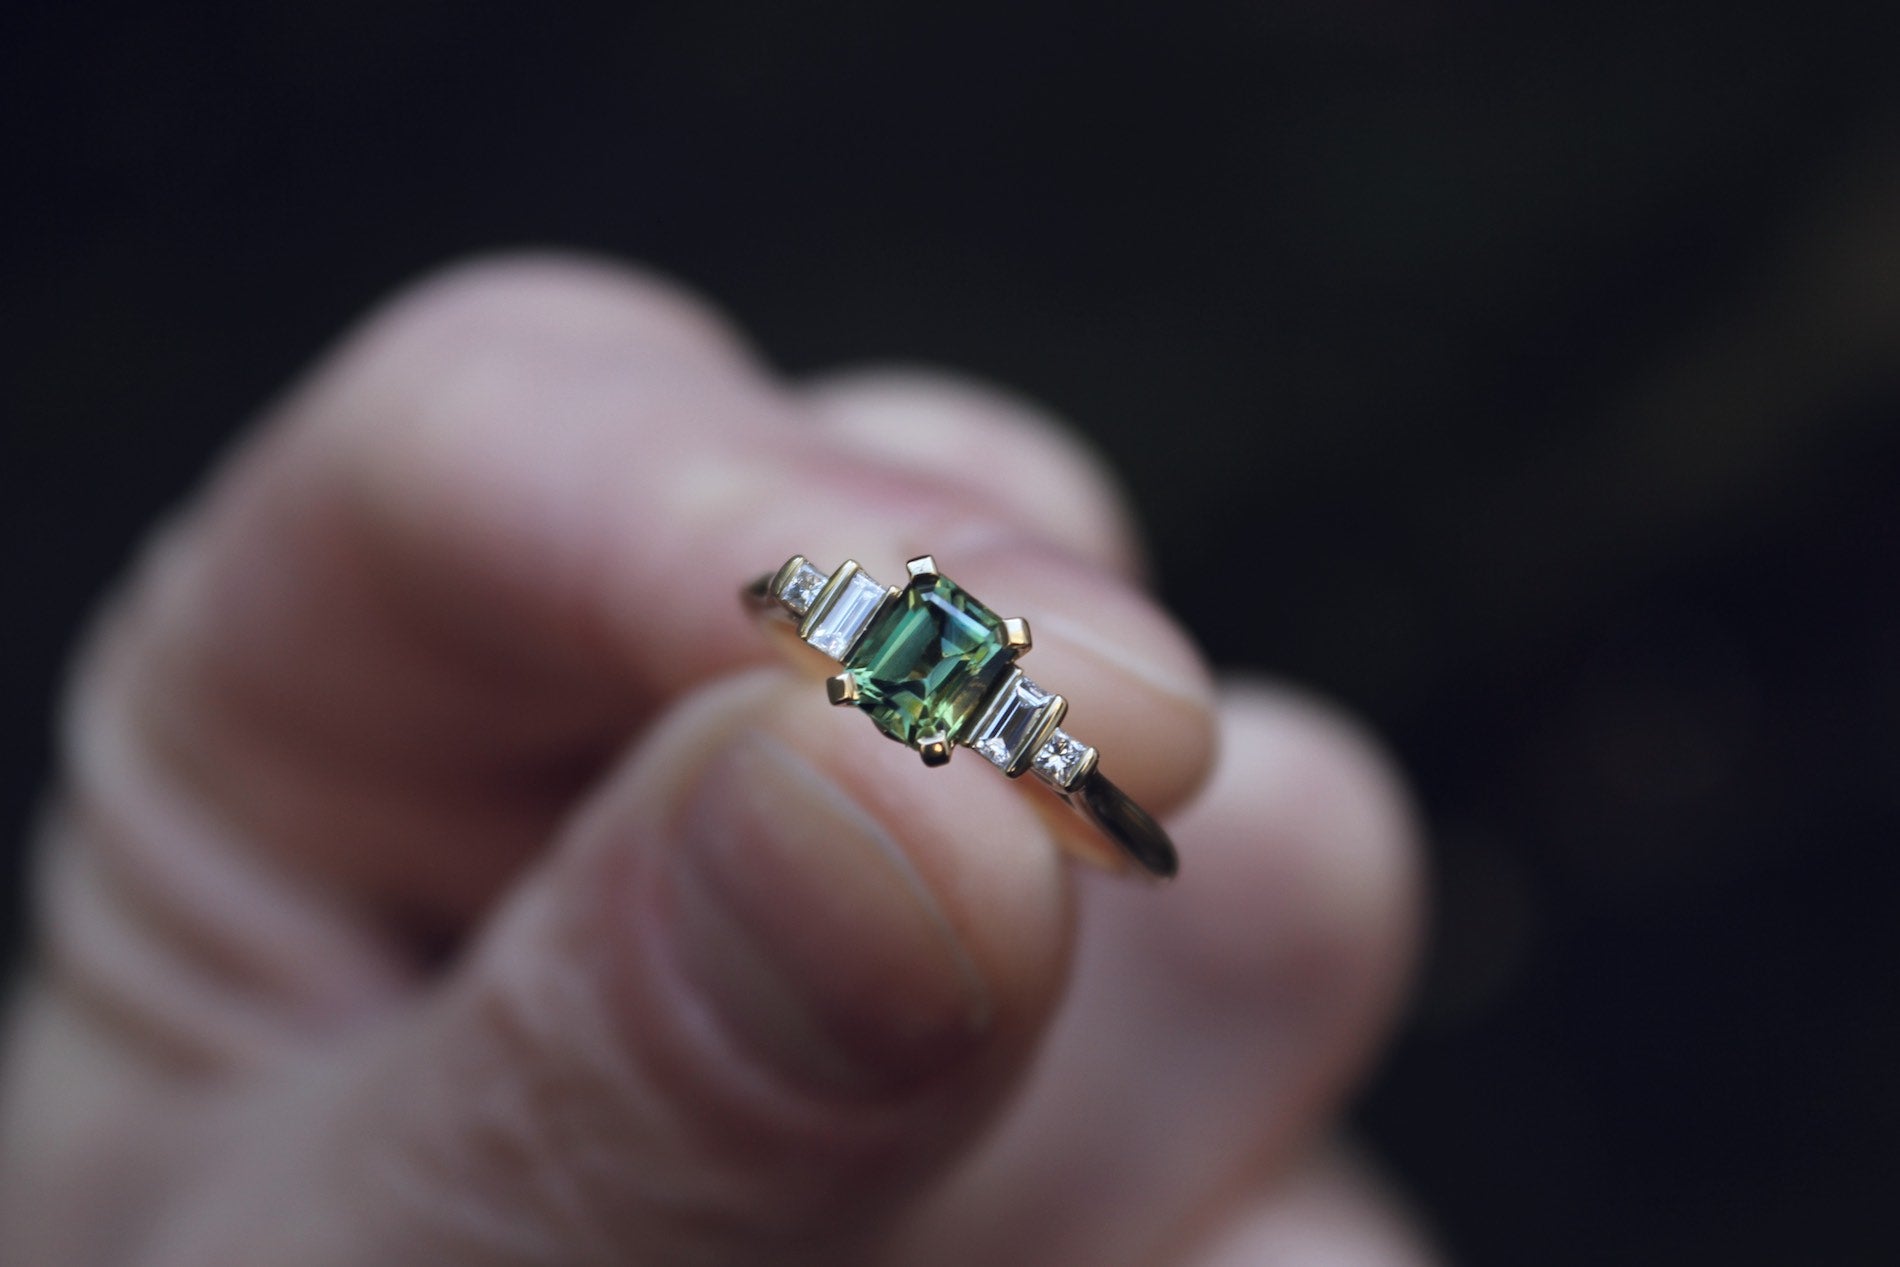 Custom Green Sapphire Ring in Gold - Gardens of the Sun | Ethical Jewelry